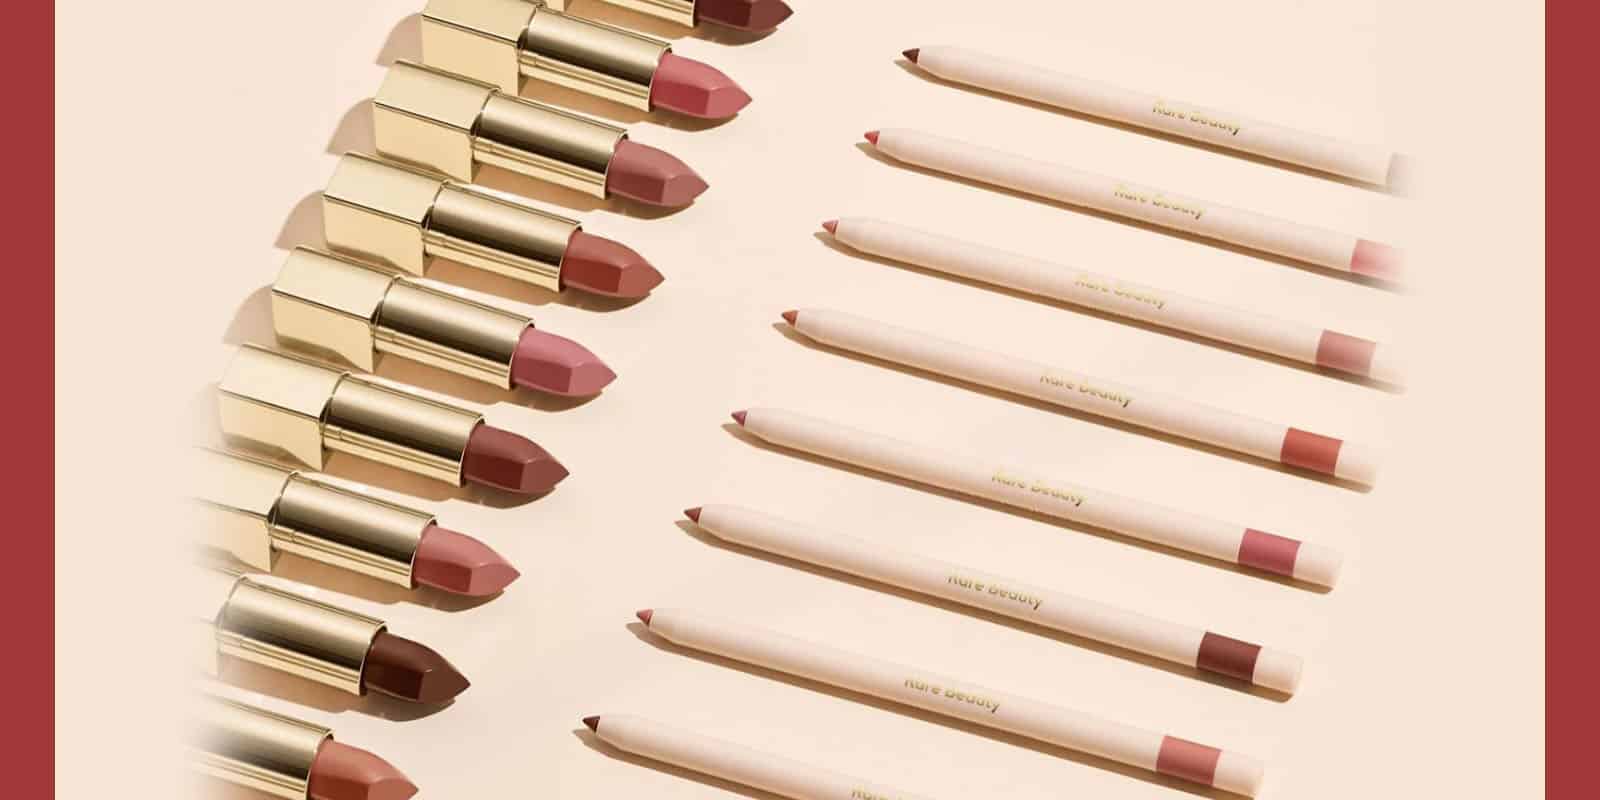 Rare Beauty Kind Words Matte Lipsticks and Liners For The Ultimate Nude Lip